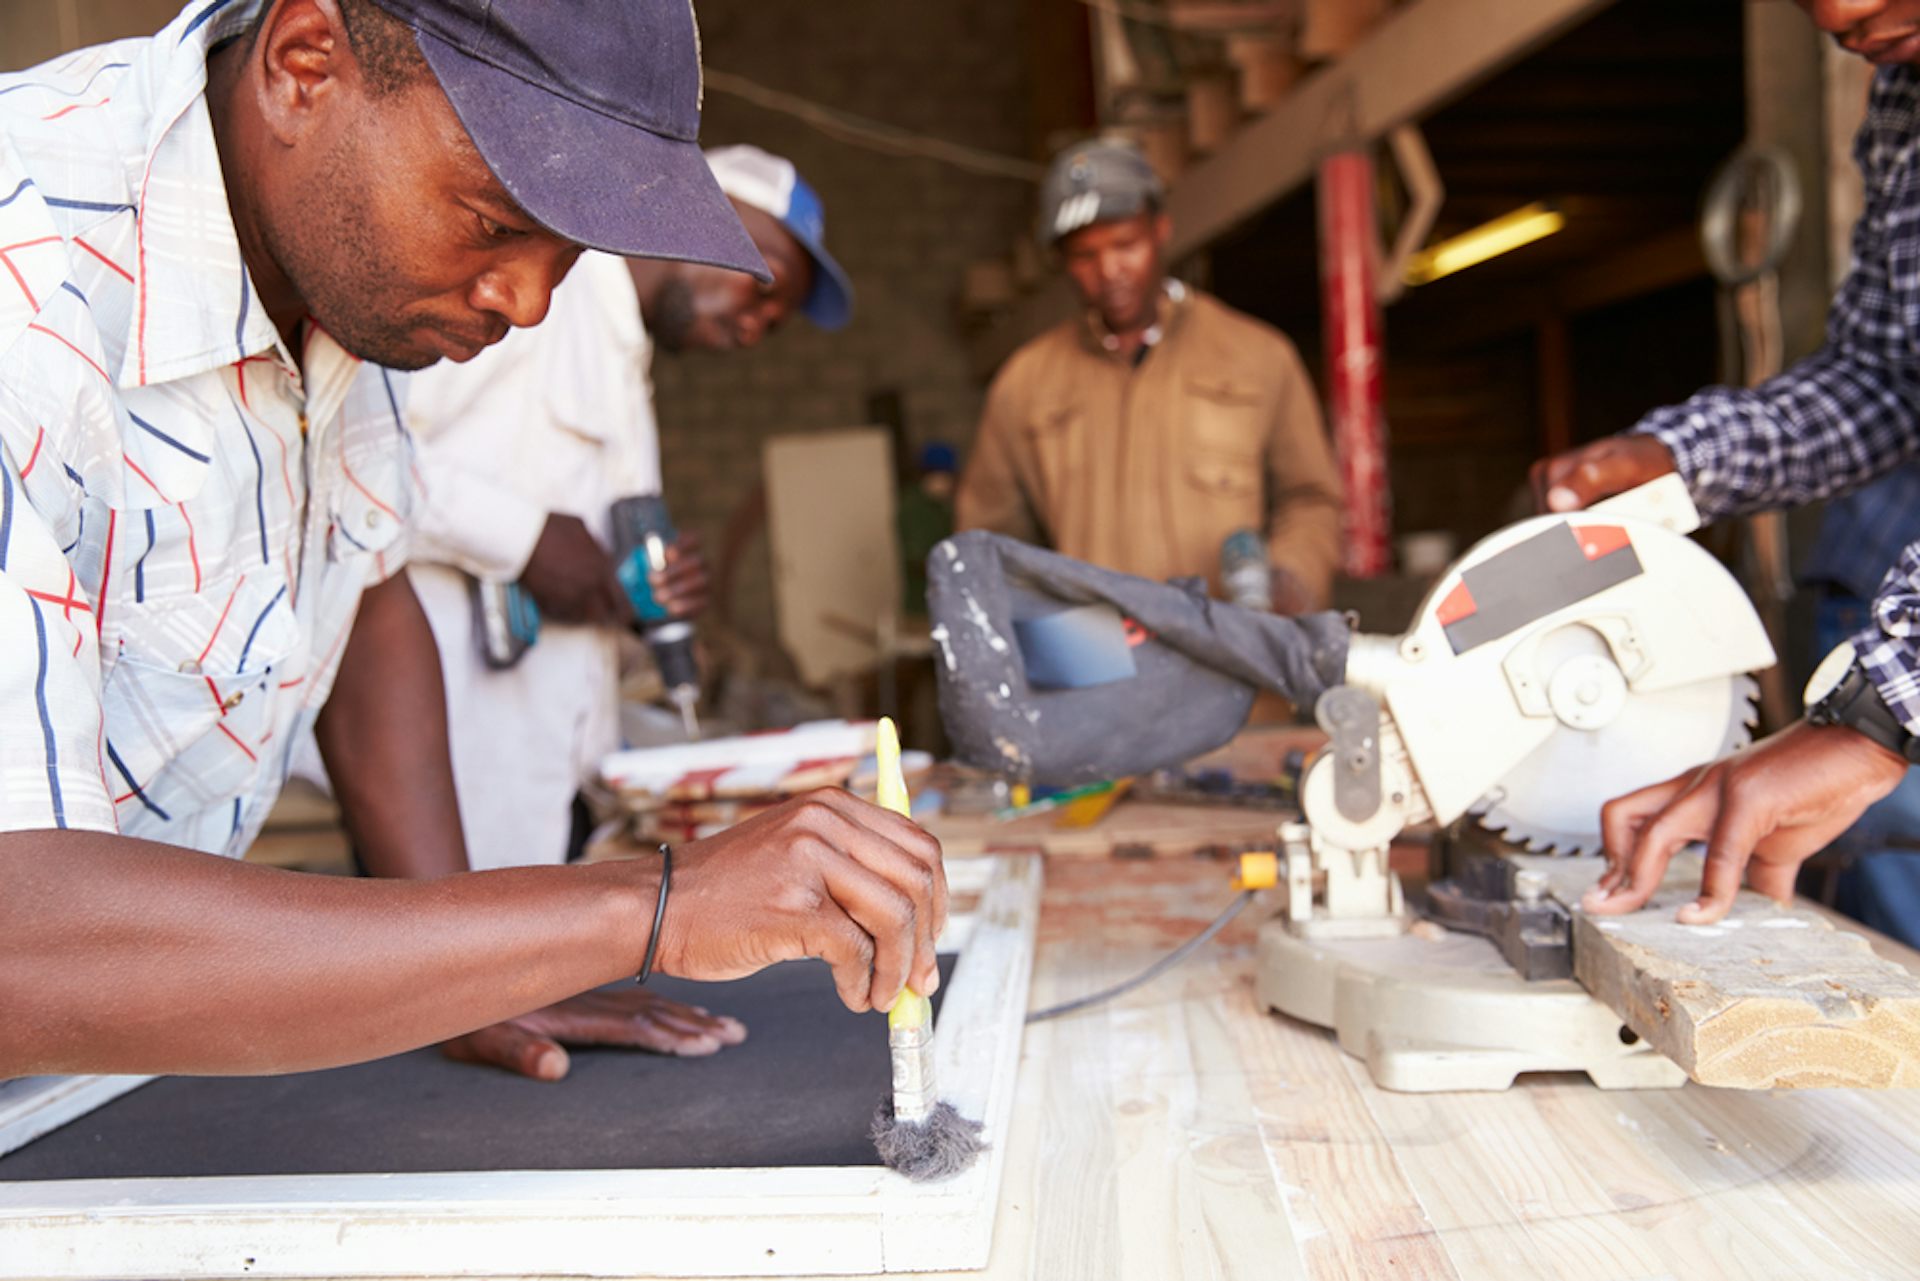 South Africa’s Informal Sector: Why People Get Stuck in Precarious Jobs